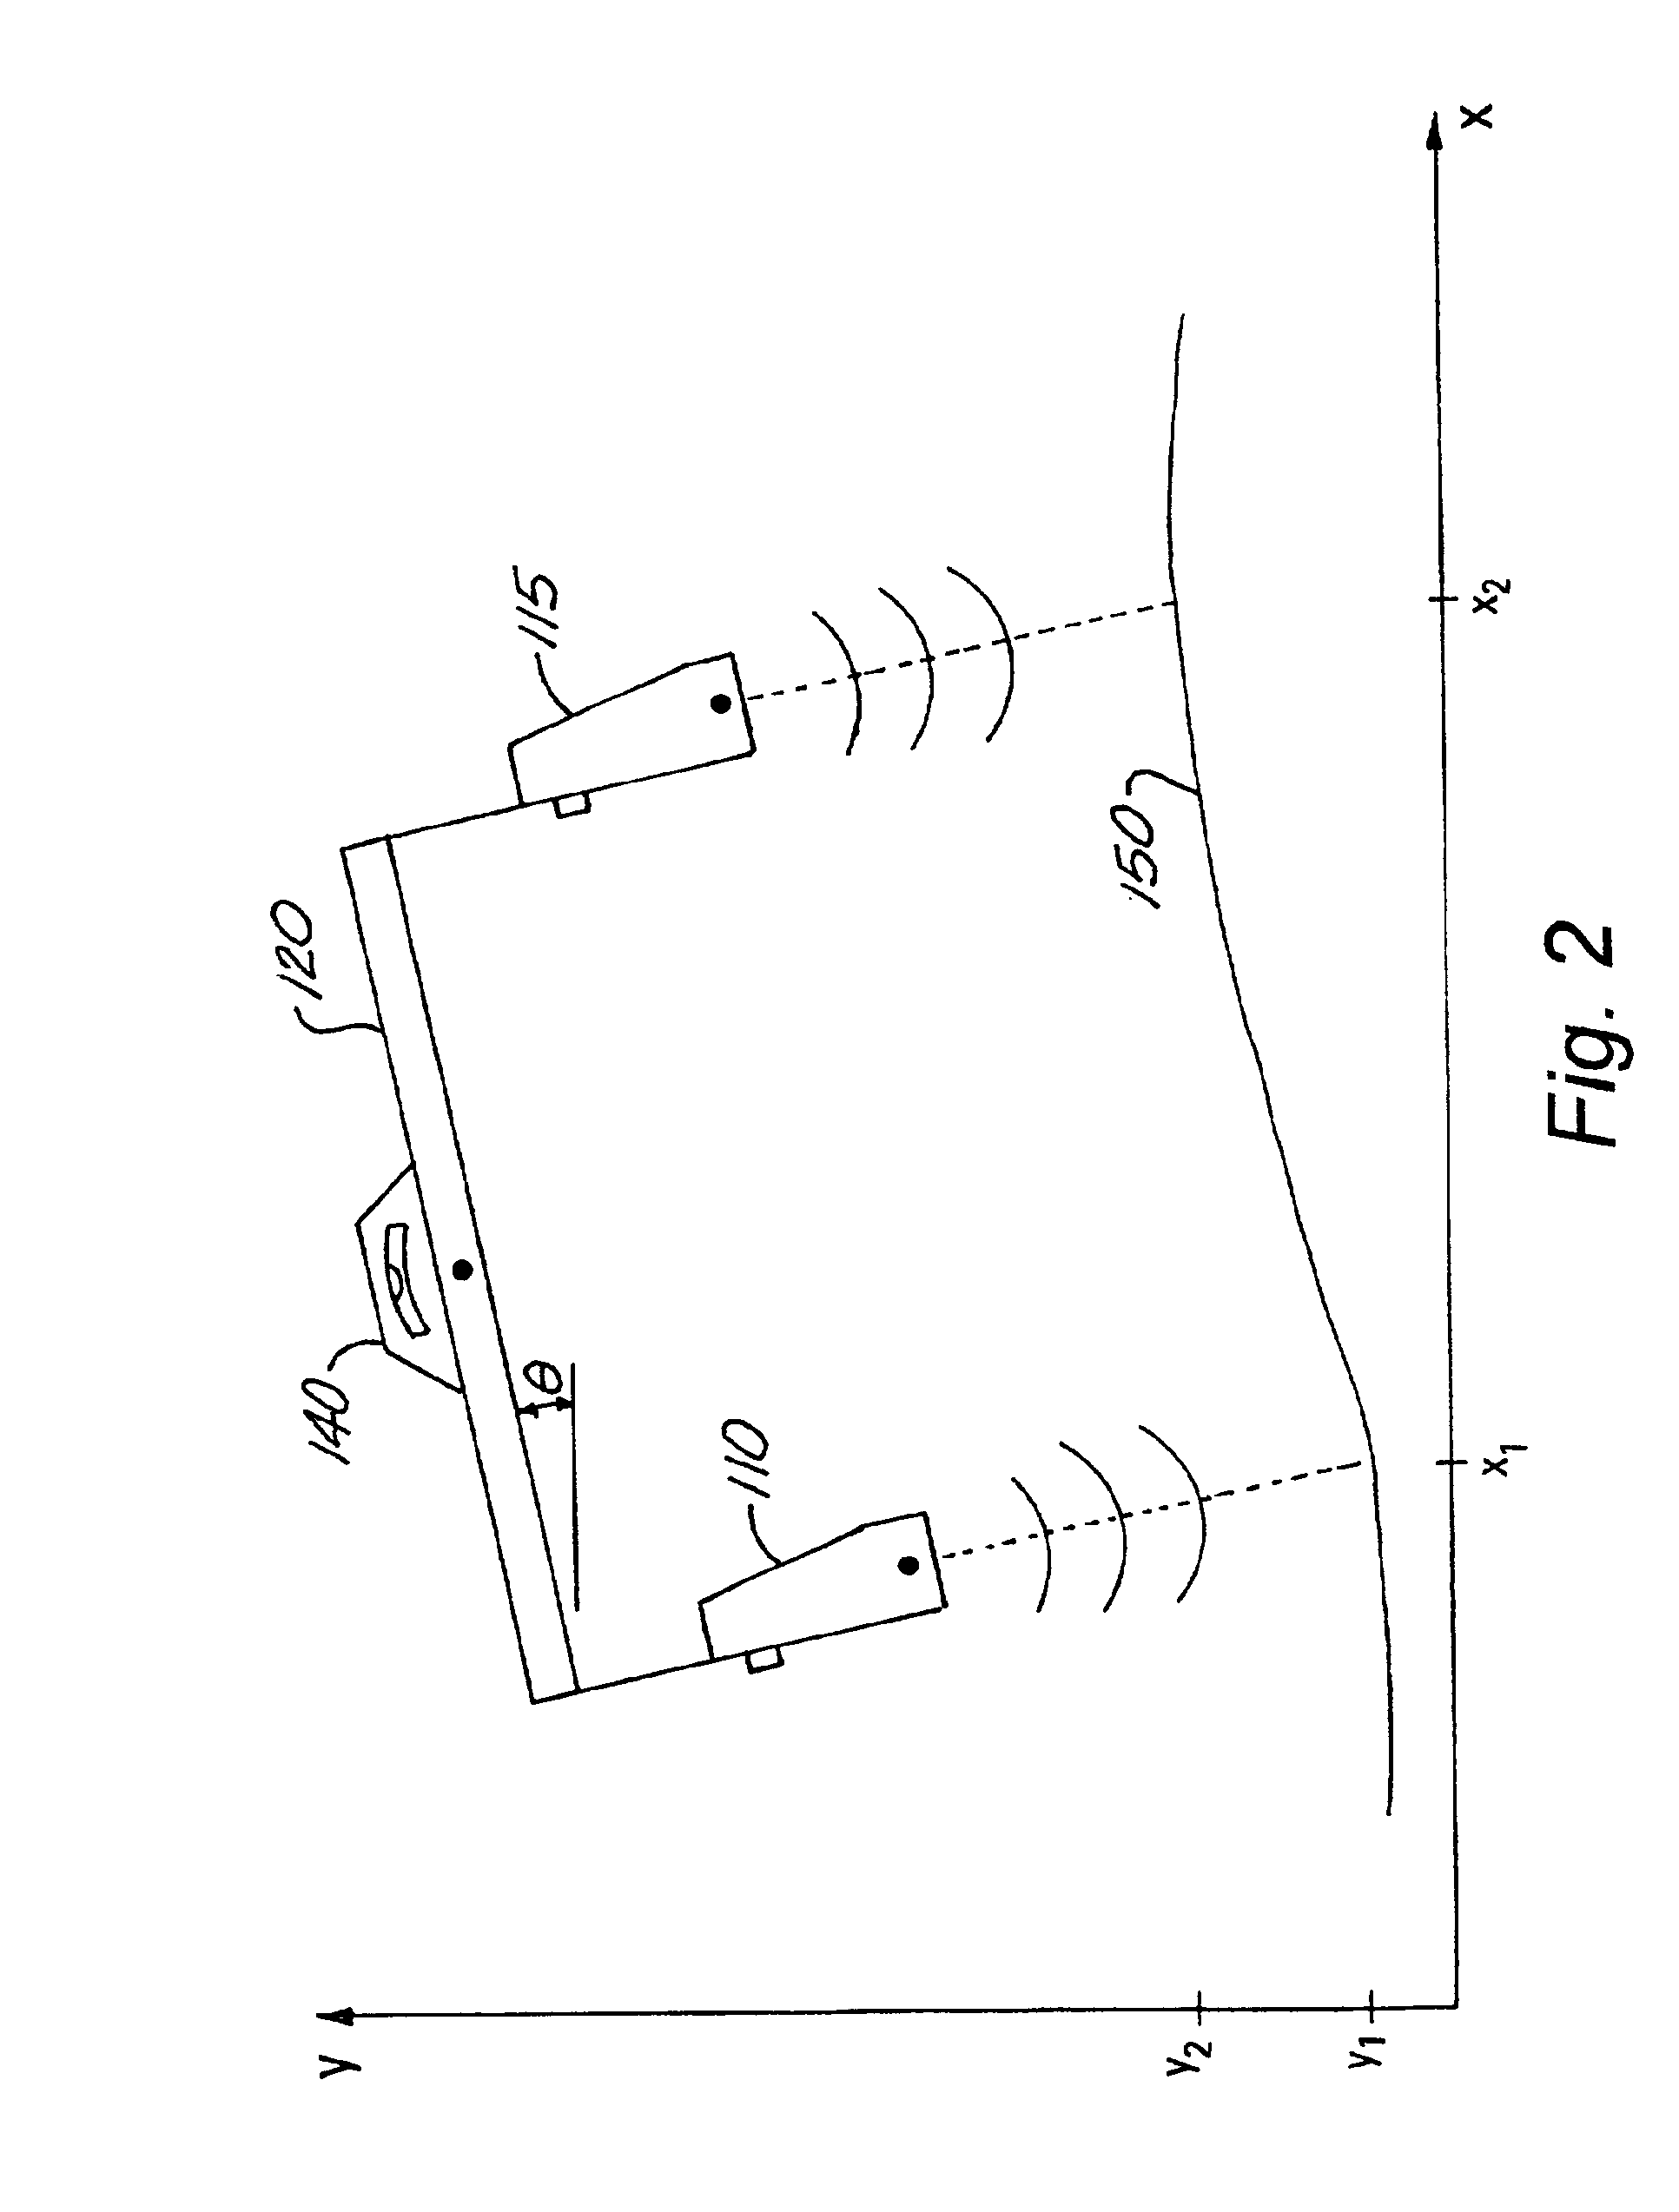 Method and apparatus for calculating and using the profile of a surface